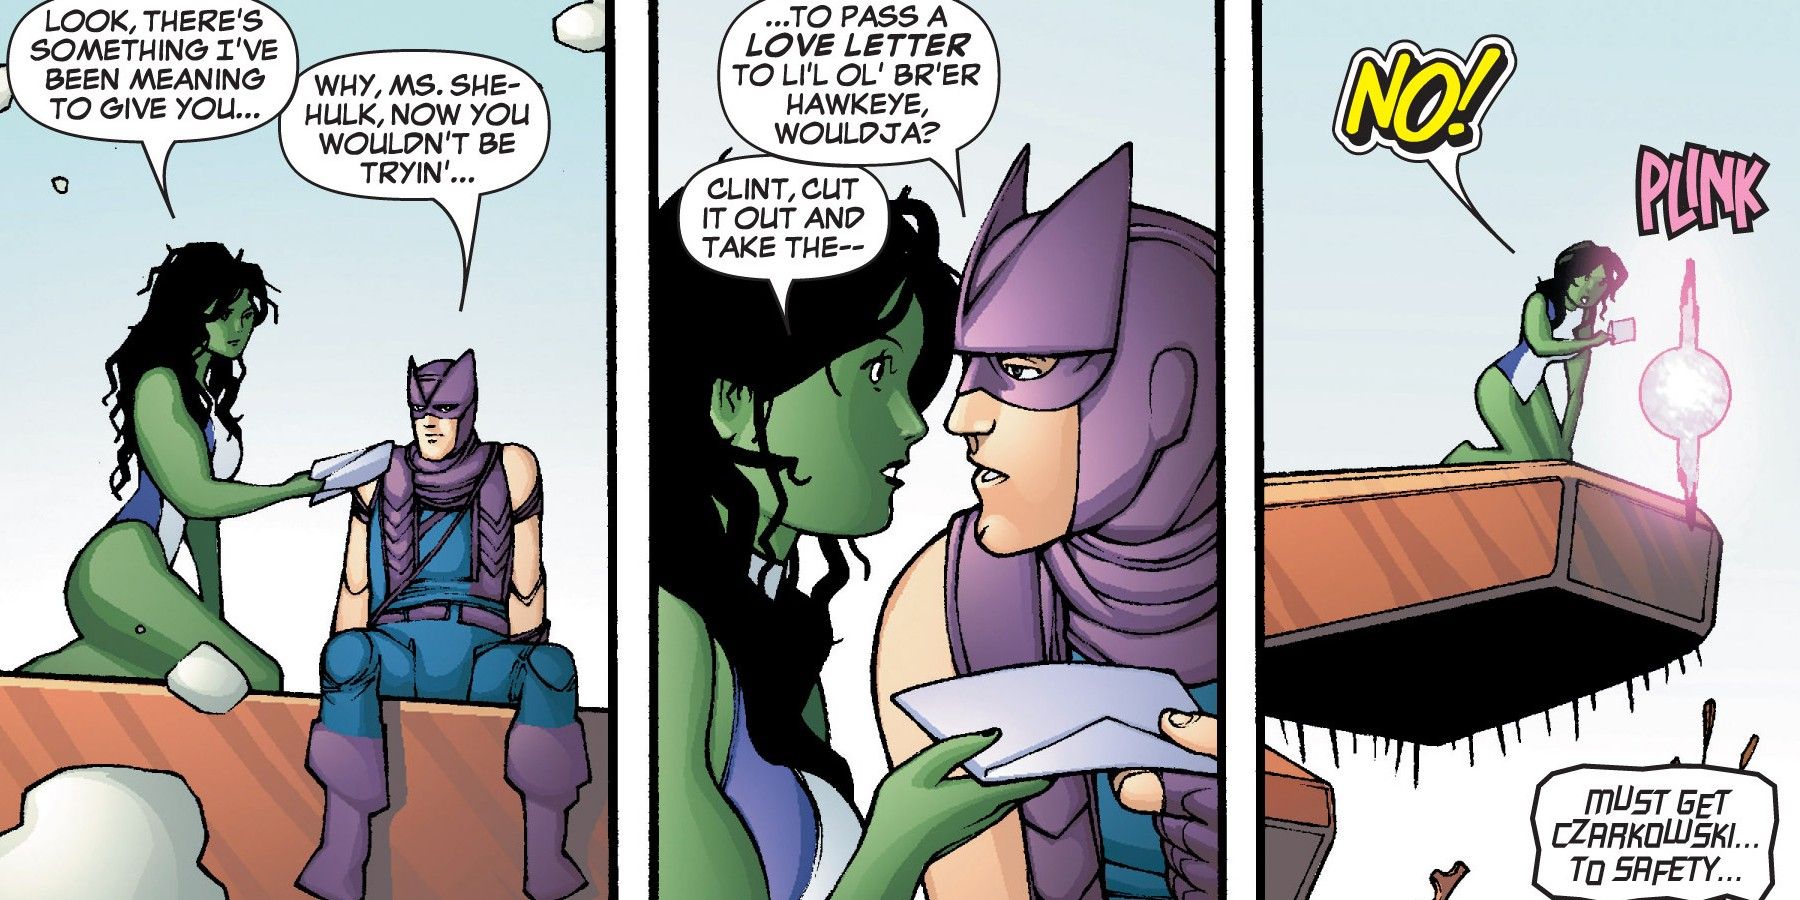 She-Hulk trying to give Hawkeye a letter warning him of his imminent death in 2005's She-Hulk #2